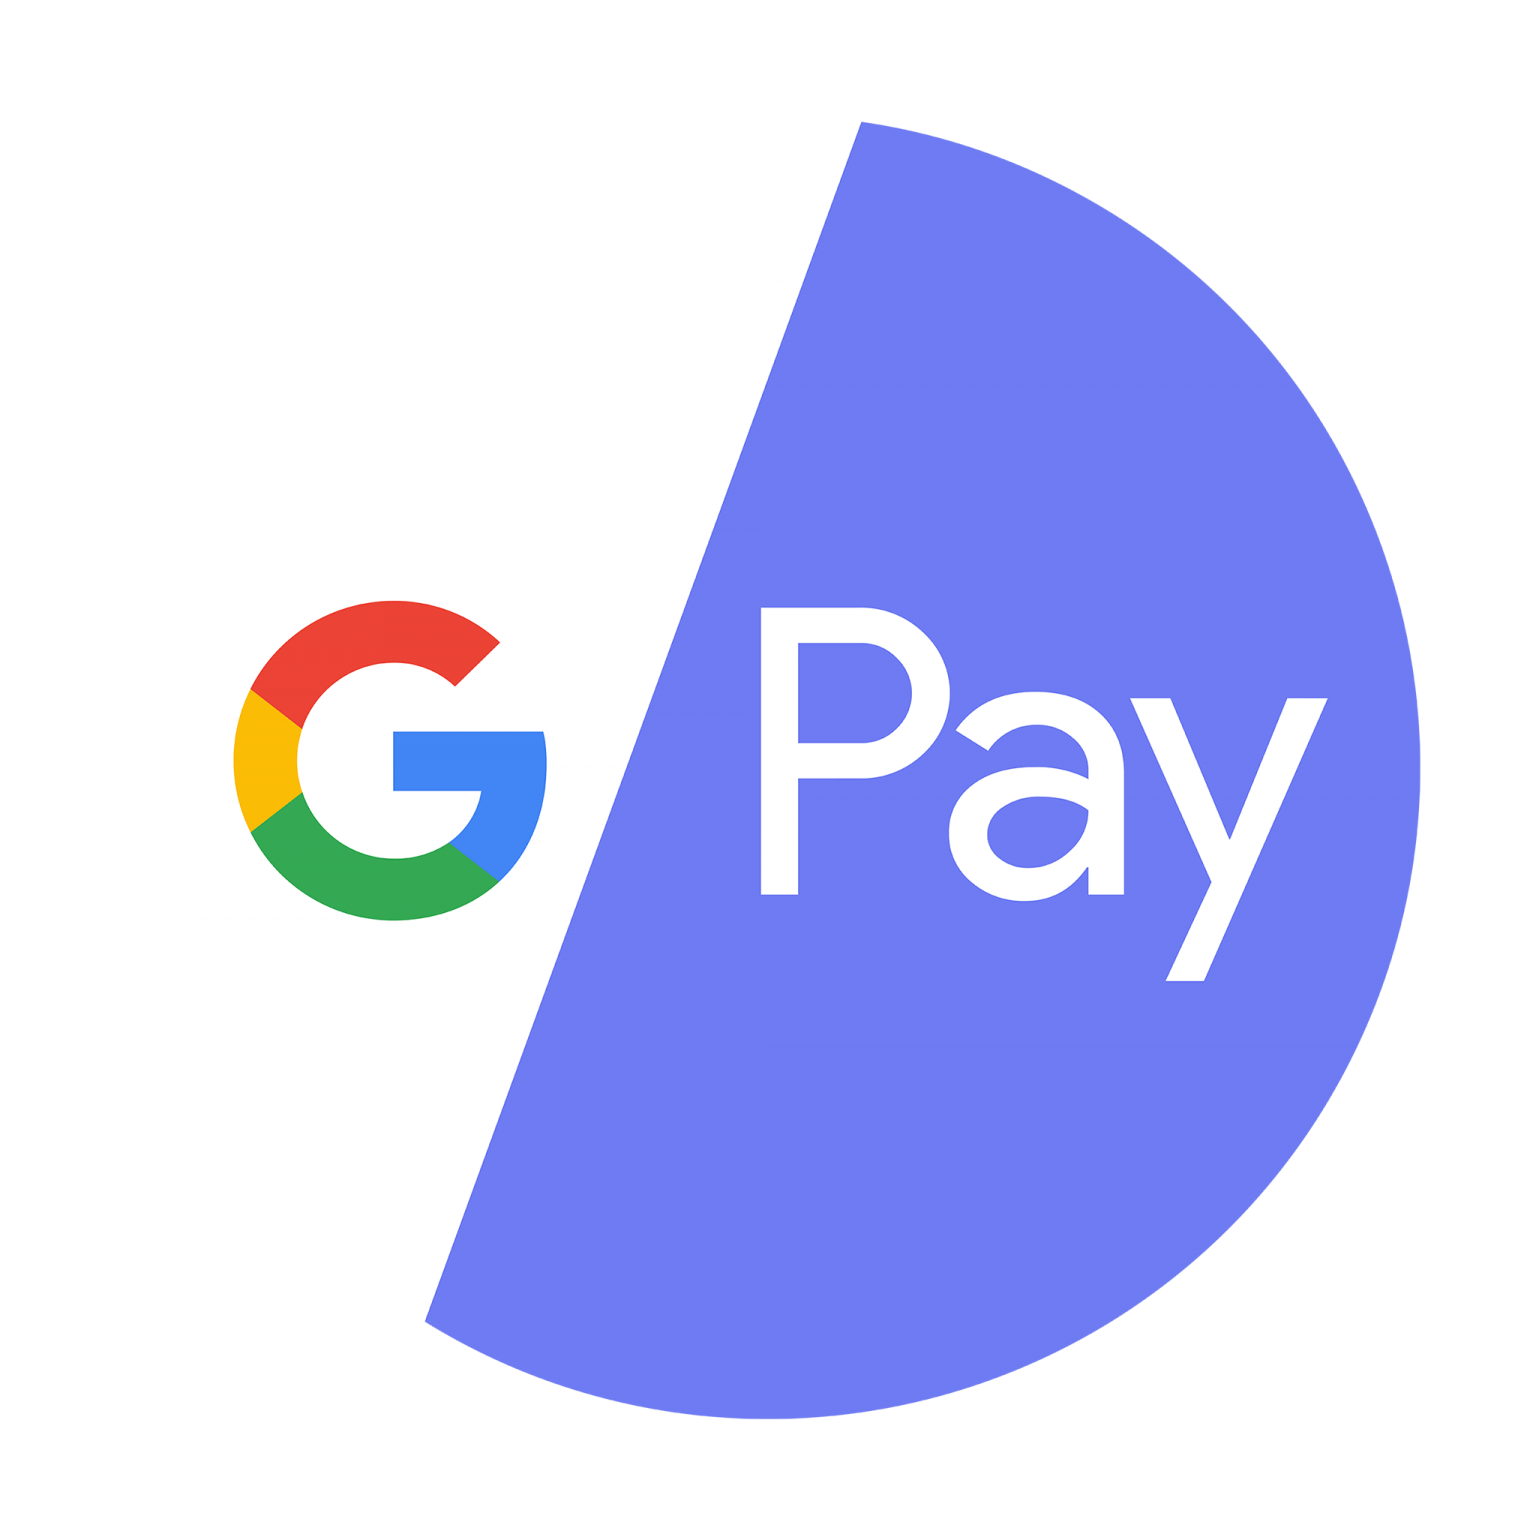 gpay and google pay